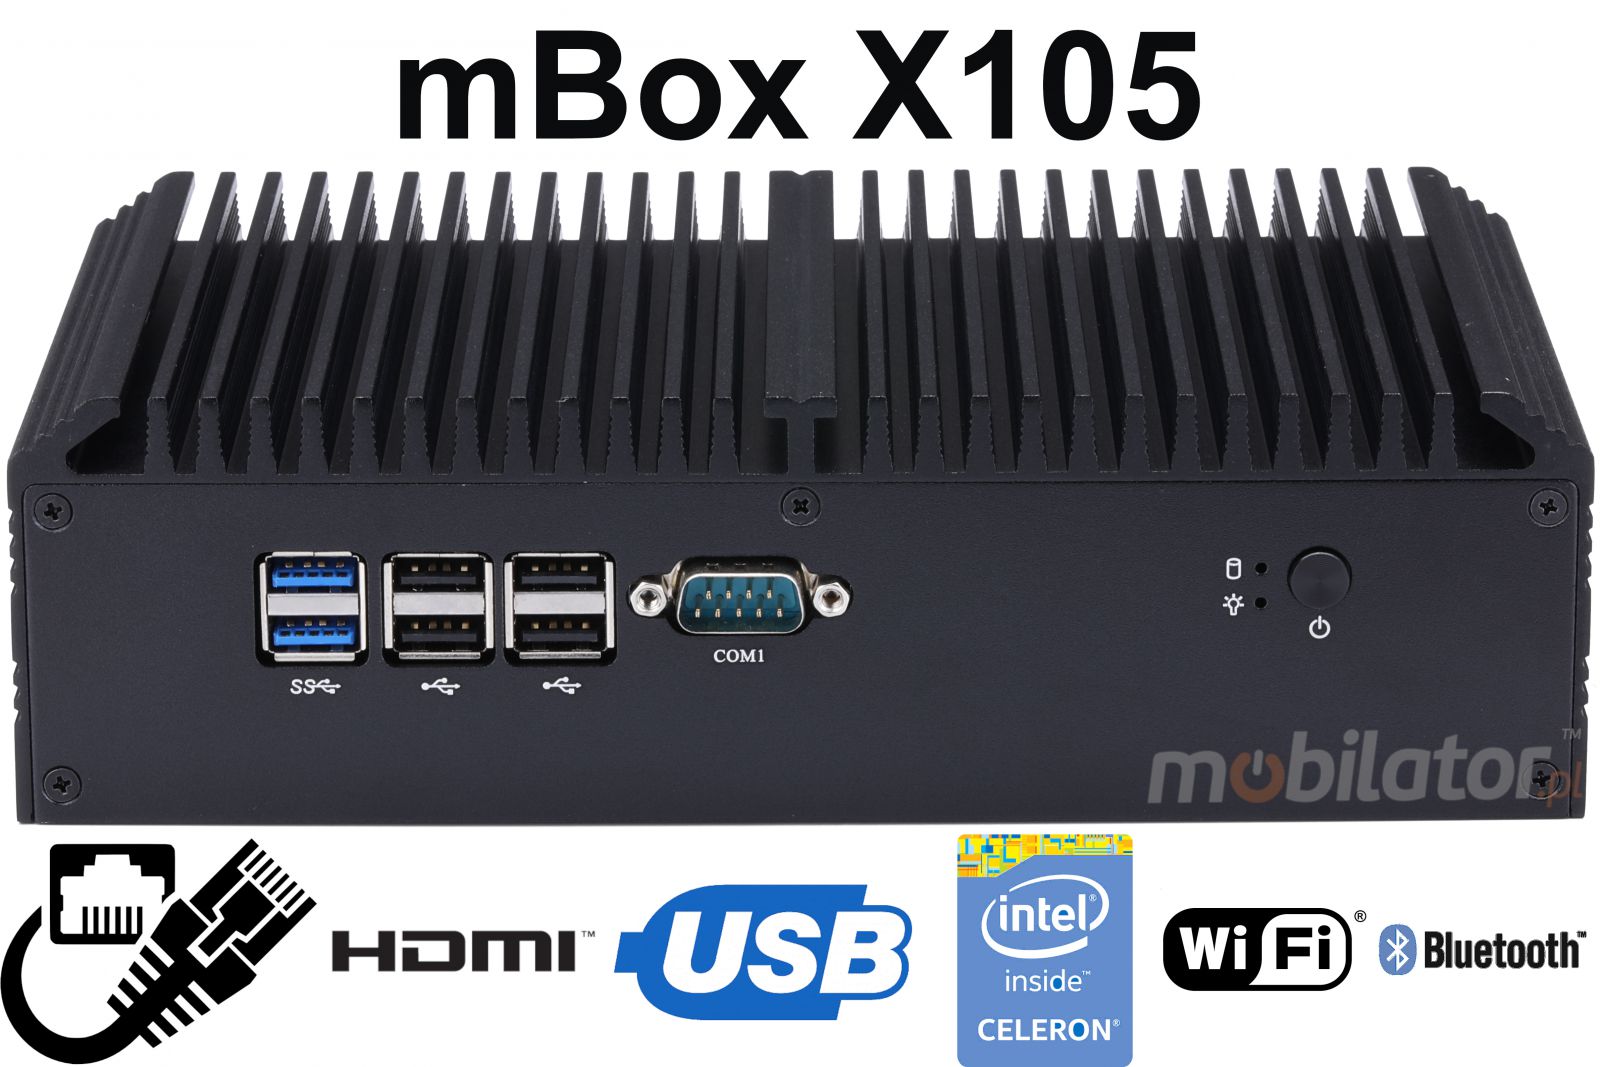 mBox X105 v.4 - Industrial Mini Computer with: passive cooling, M.2 disk (512GB), slot for another 2.5'' disk, 16GB RAM, USB 3.0, WIFI + BT - Title image